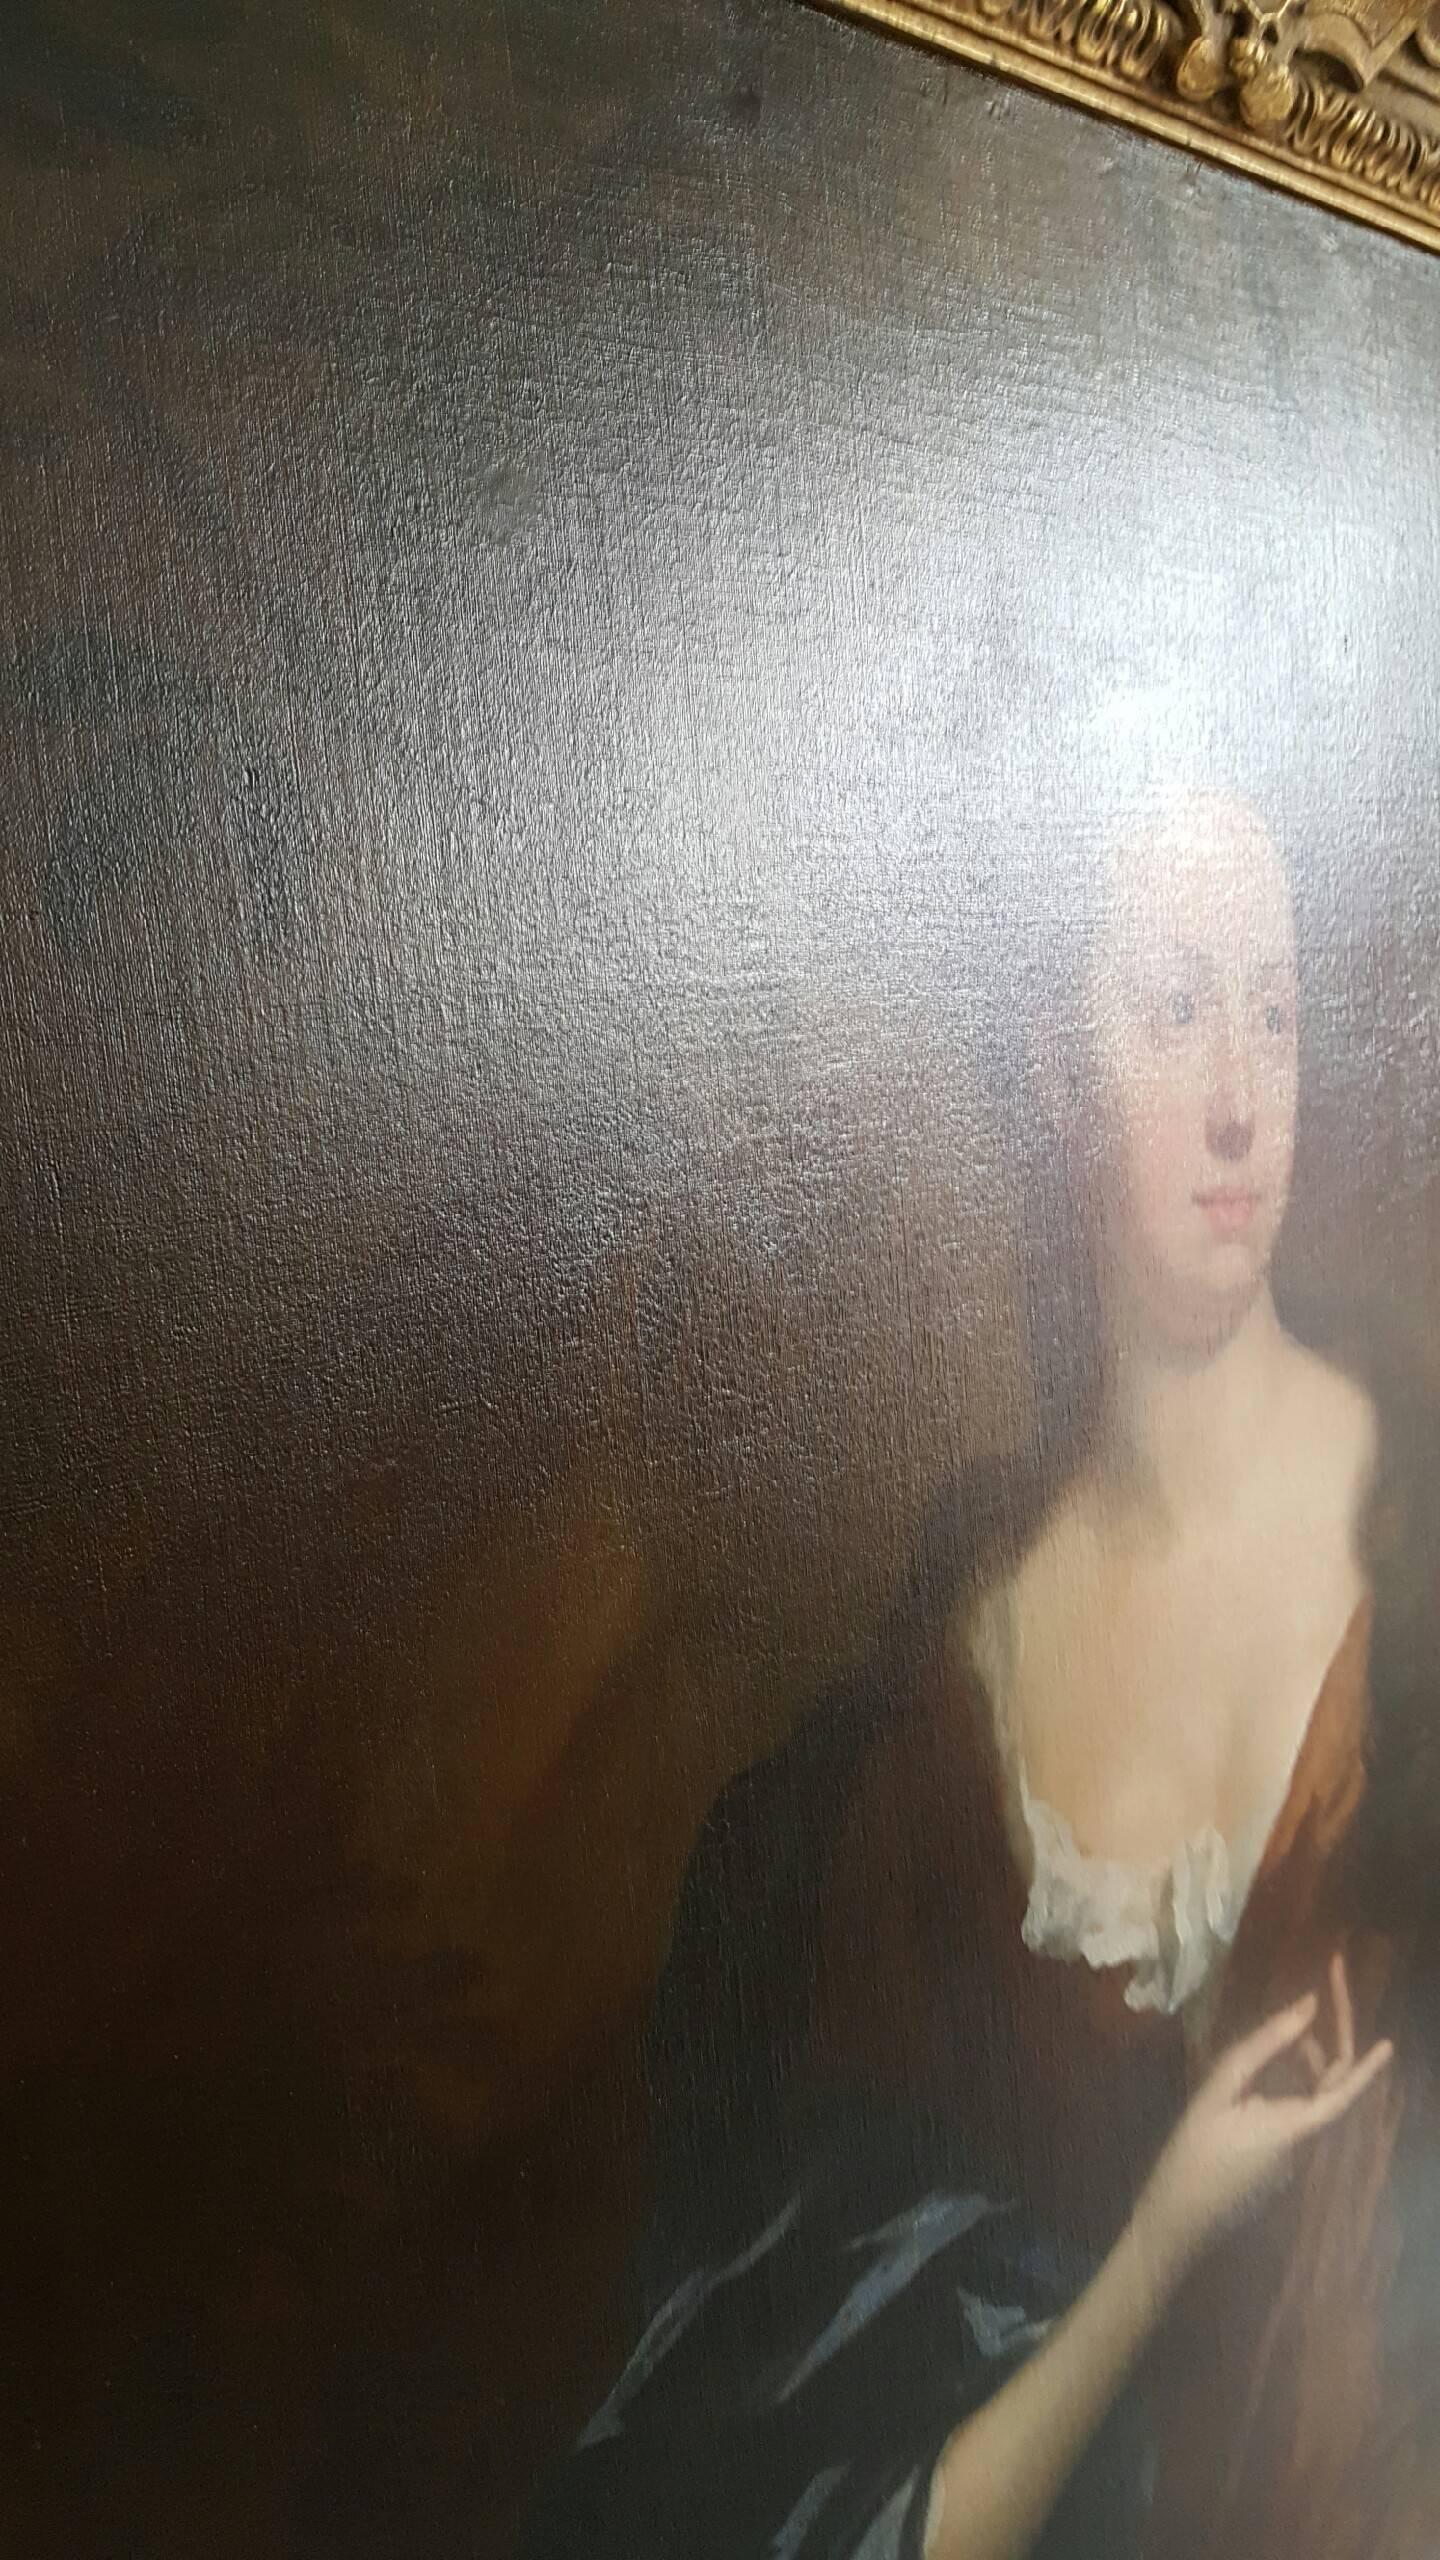 Portrait of Mrs. Fisher of Packerton, Warwick in  Brown dress with Blue Shawl - Old Masters Painting by Sir Godfrey Kneller